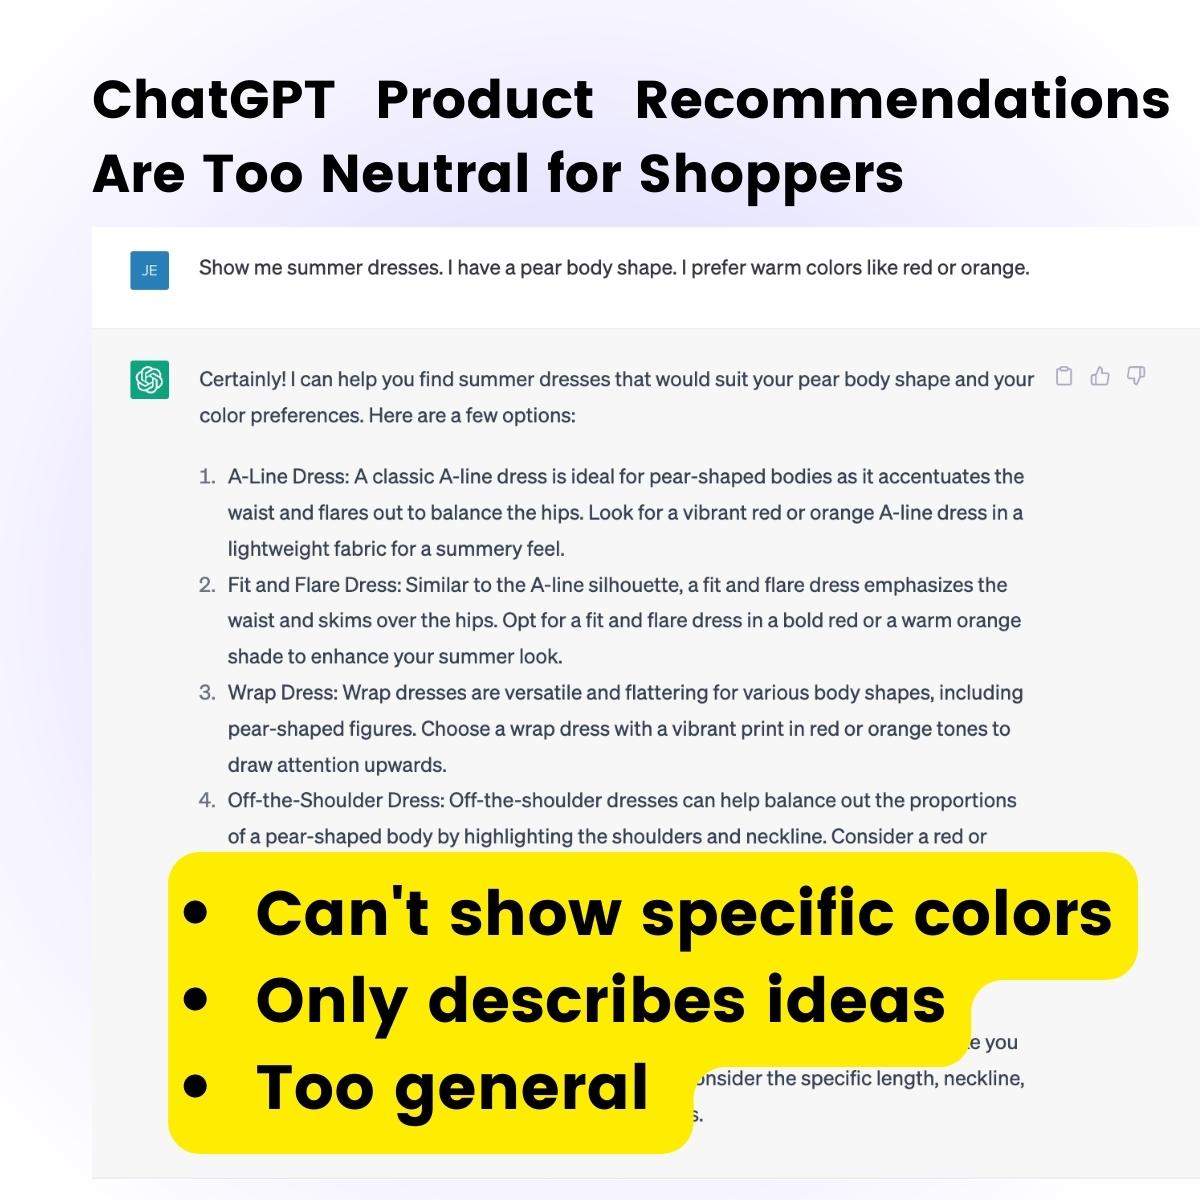 ChatGPT personalization is too general